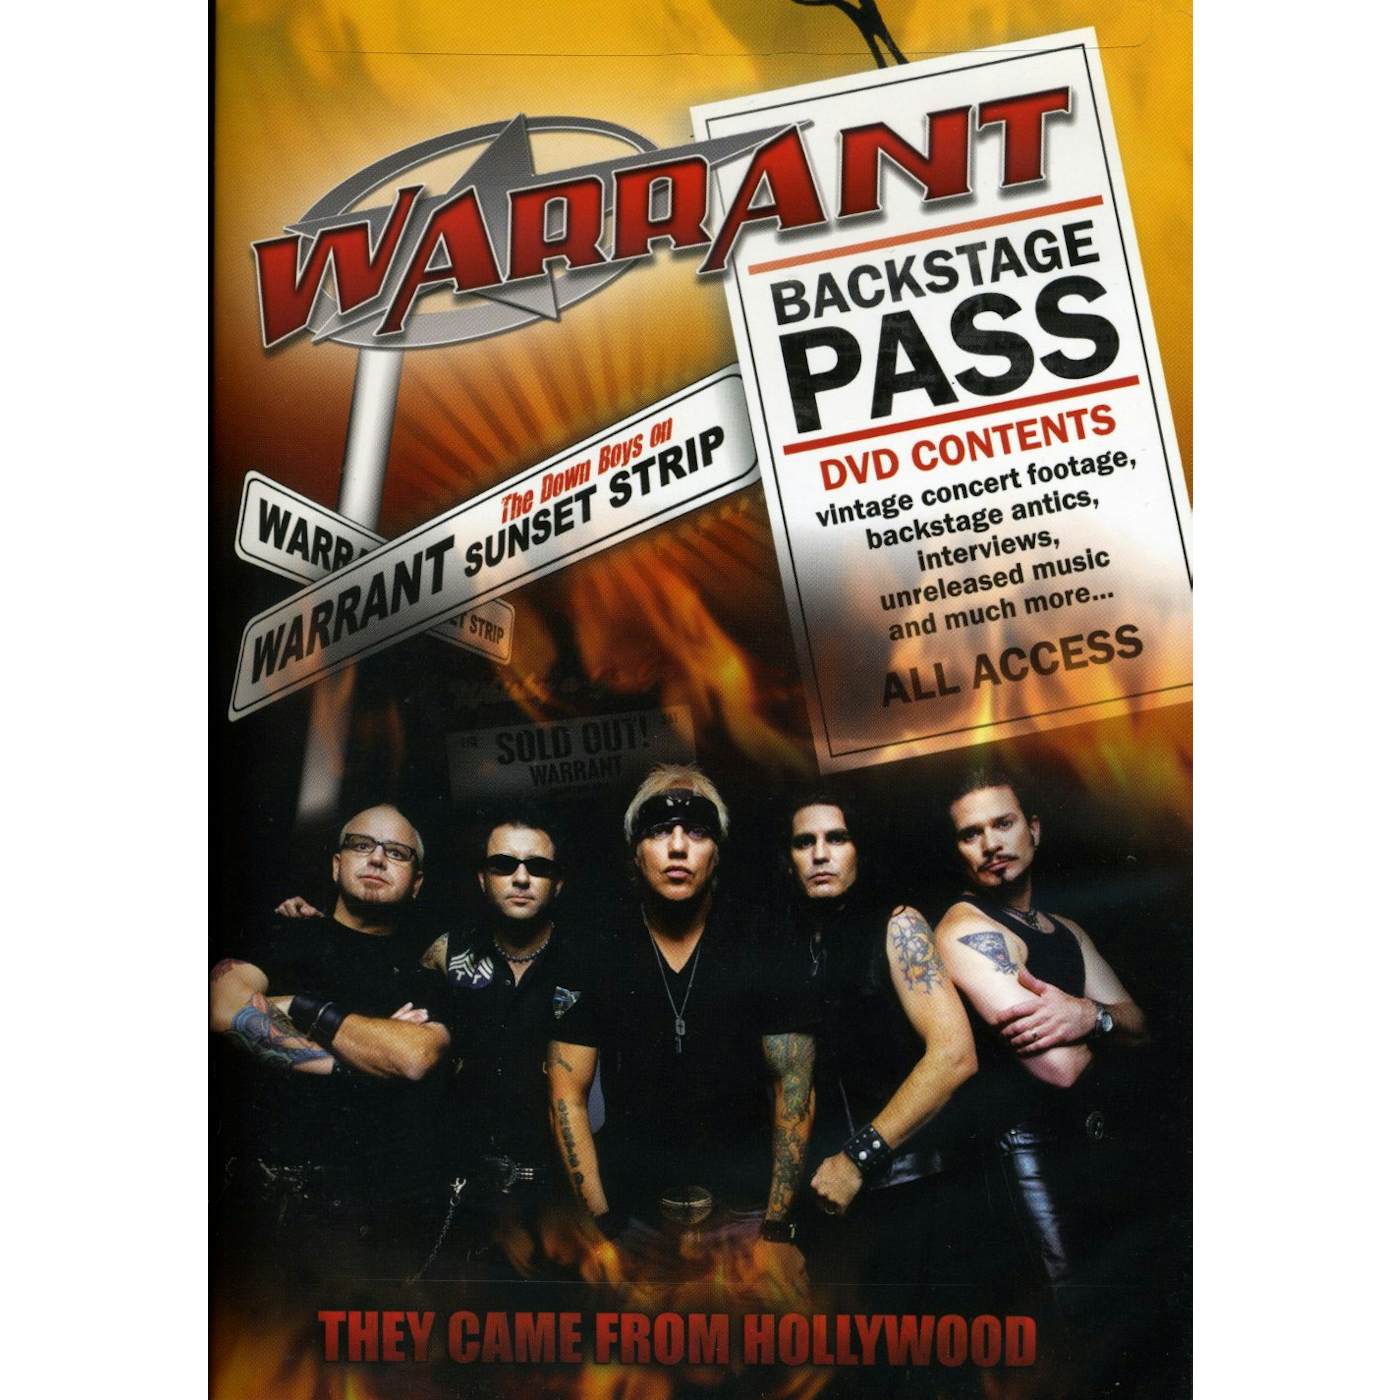 Warrant THEY CAME FROM HOLLYWOOD DVD